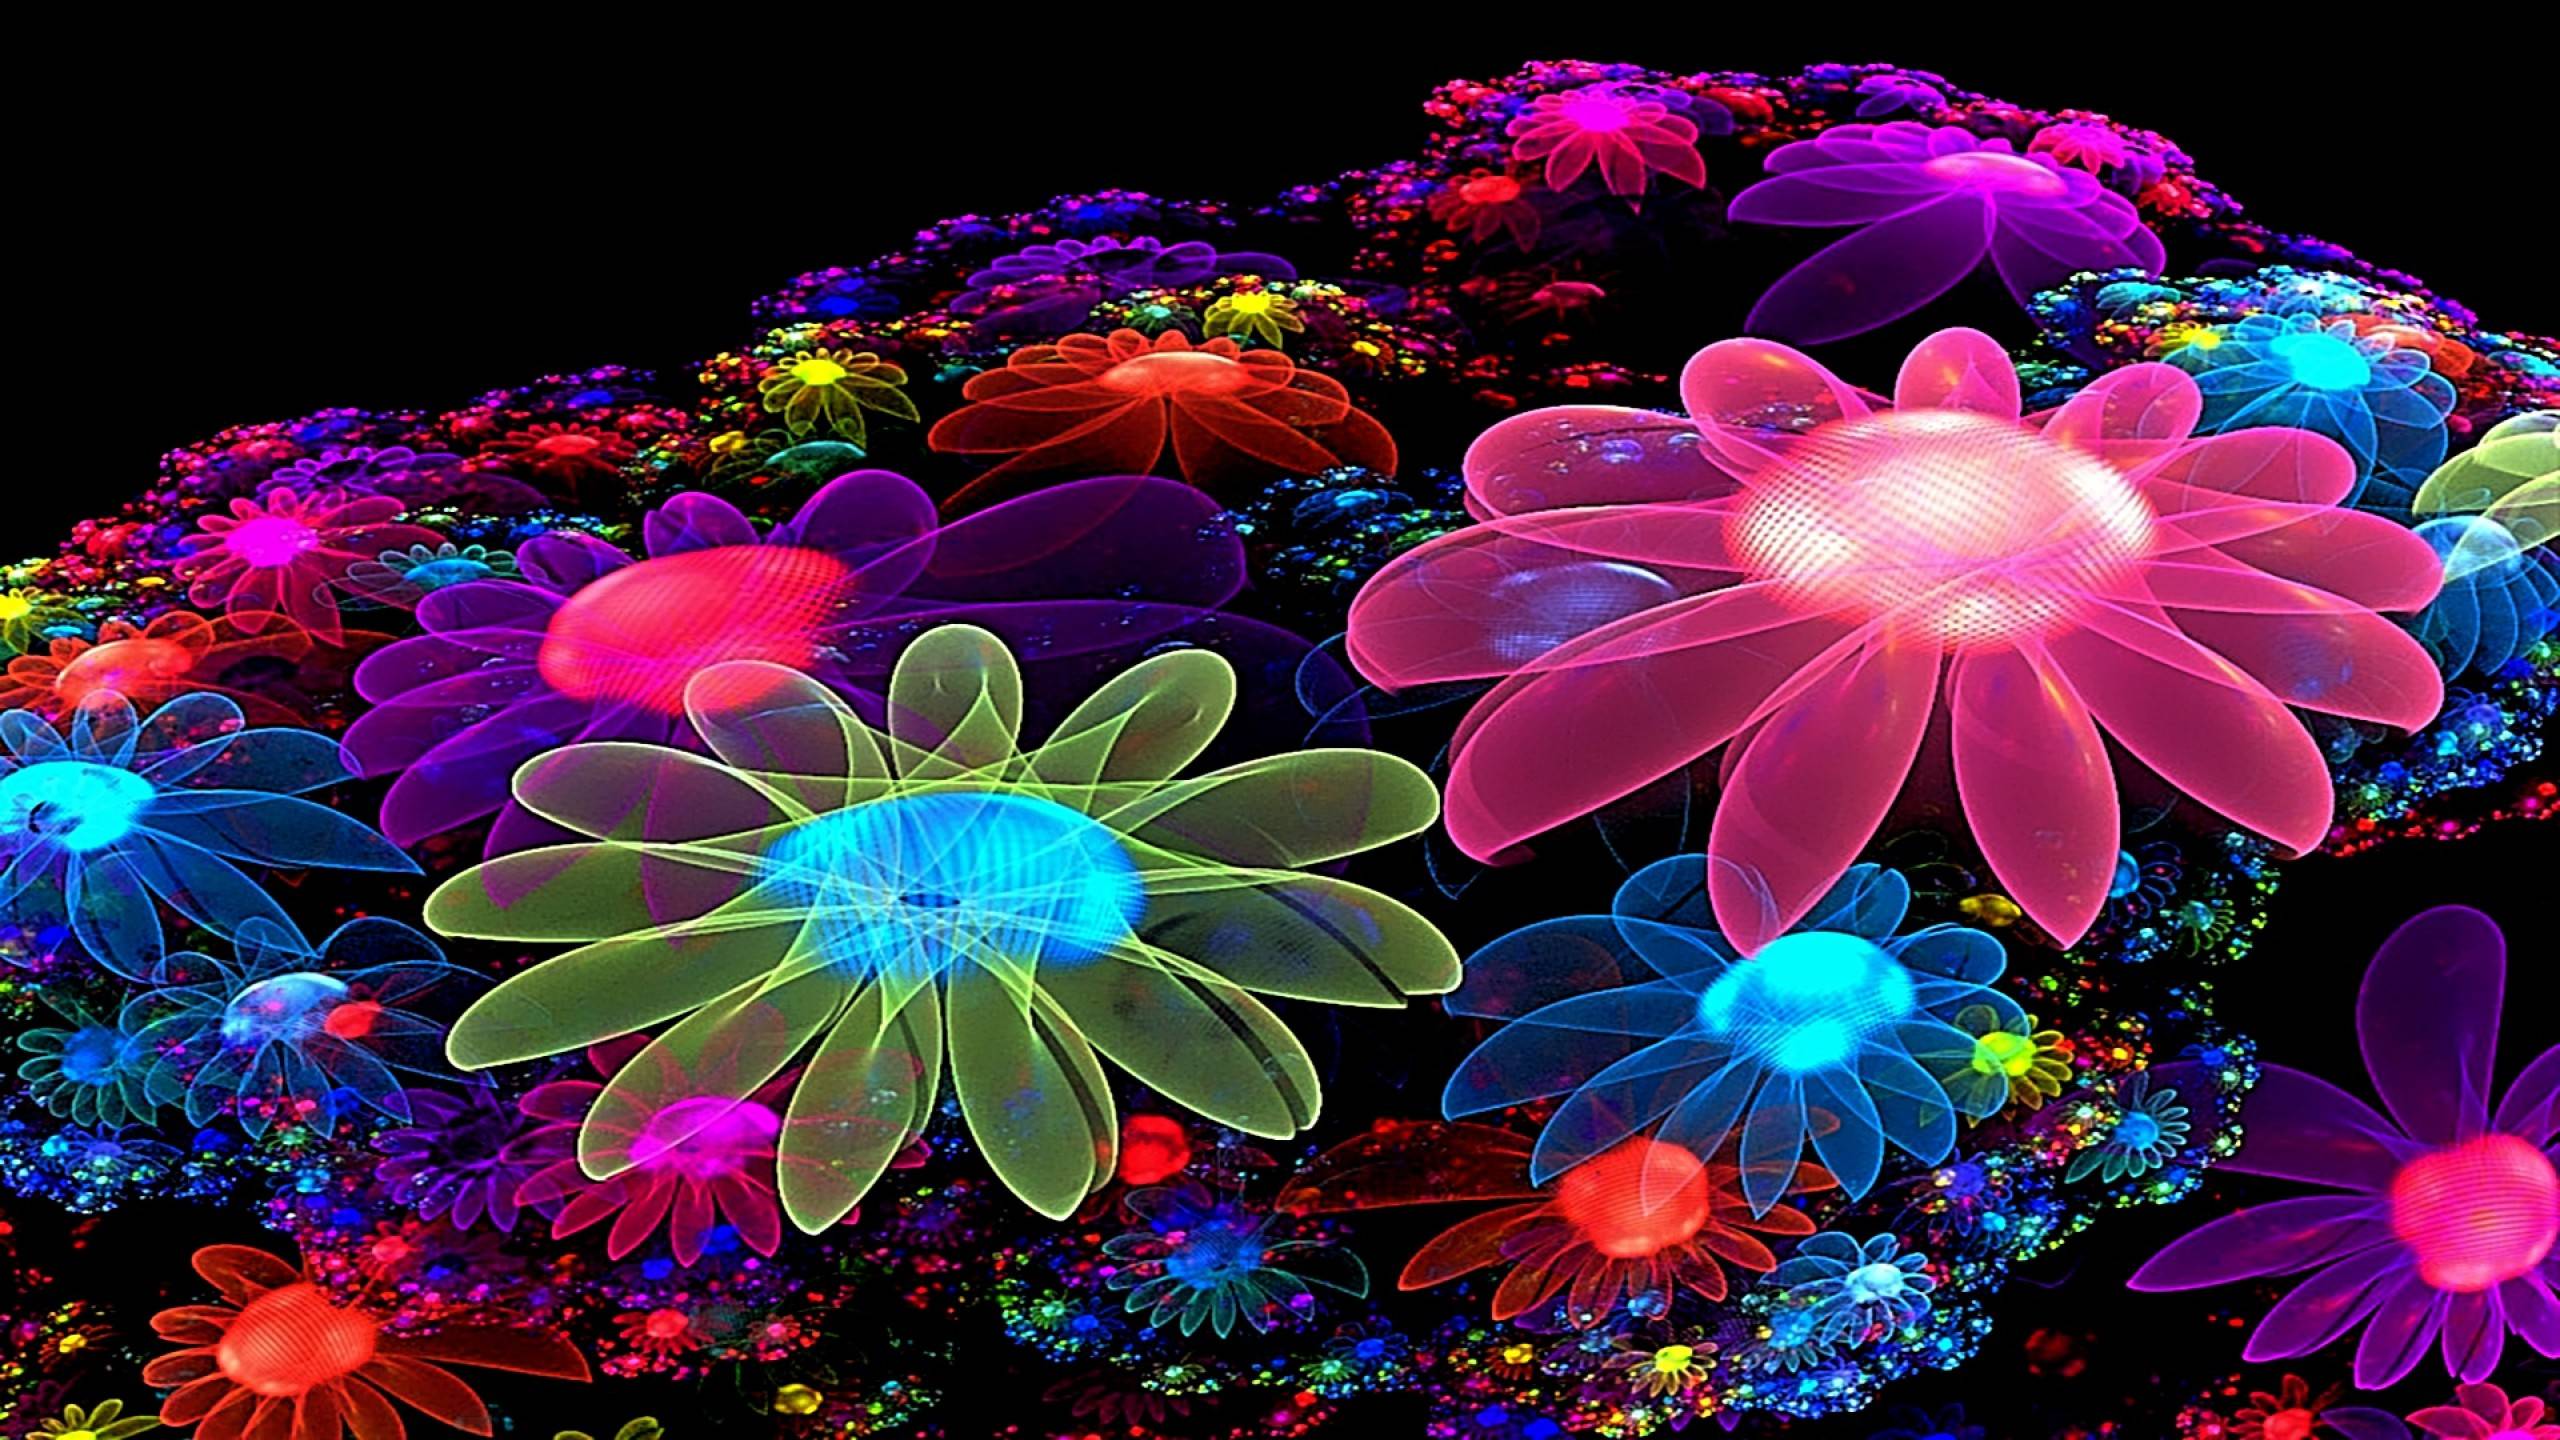 175921-colorful-abstract-flower-glow-wallpaper-hd.jpg